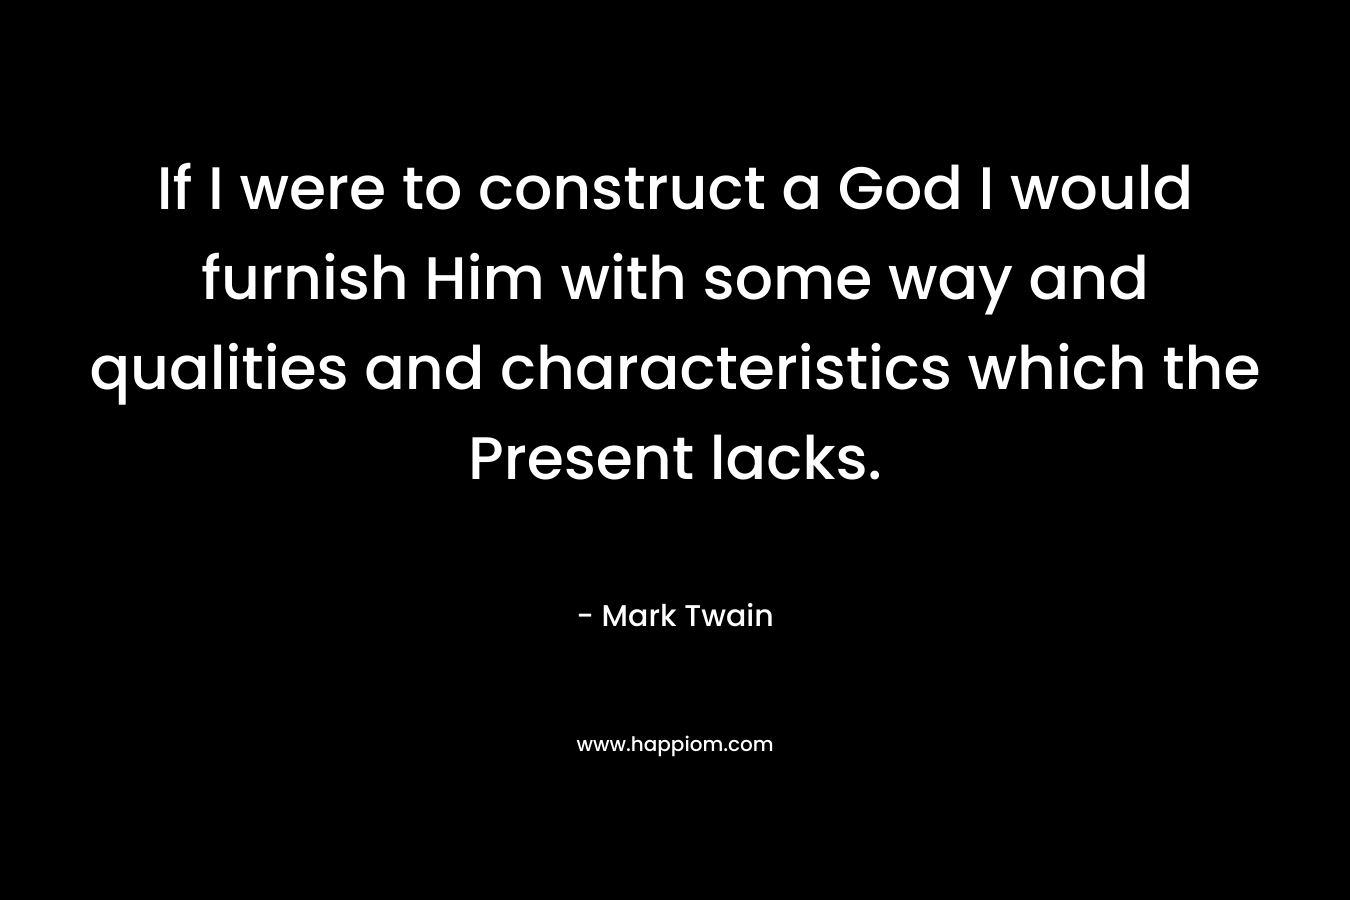 If I were to construct a God I would furnish Him with some way and qualities and characteristics which the Present lacks. – Mark Twain